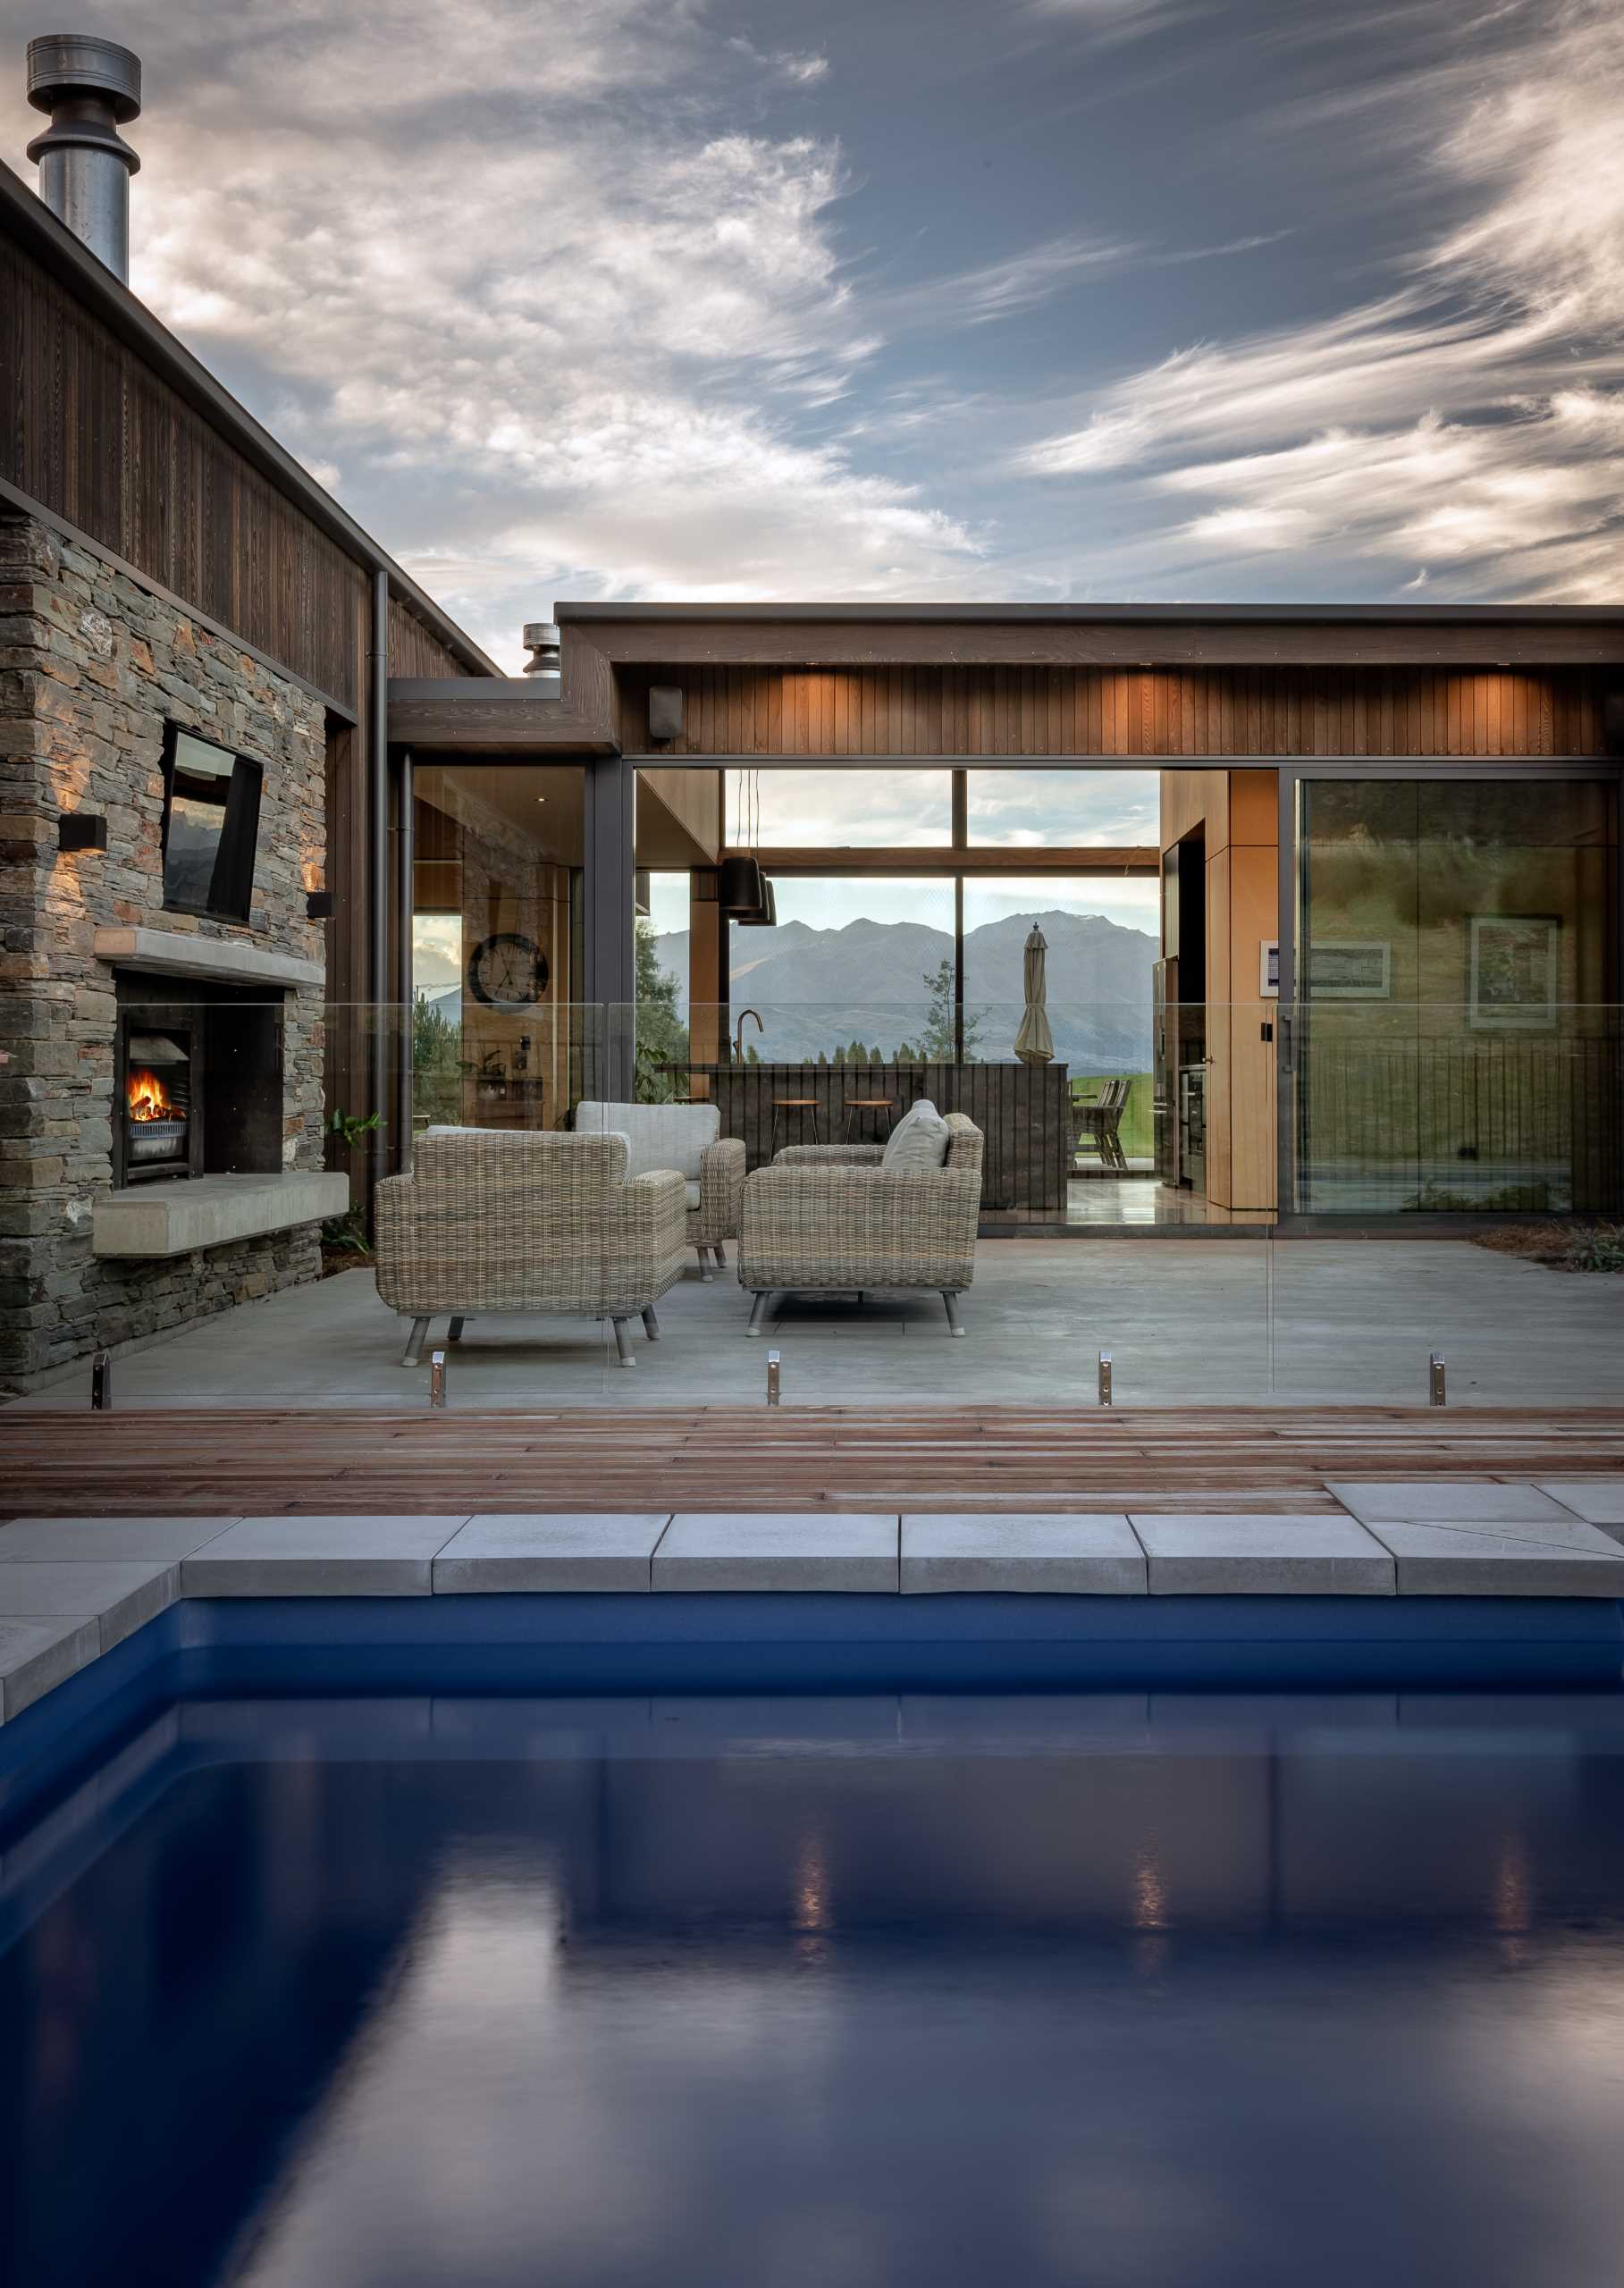 This sheltered patio encompasses an outdoor fireplace allowing it to be used year-round.